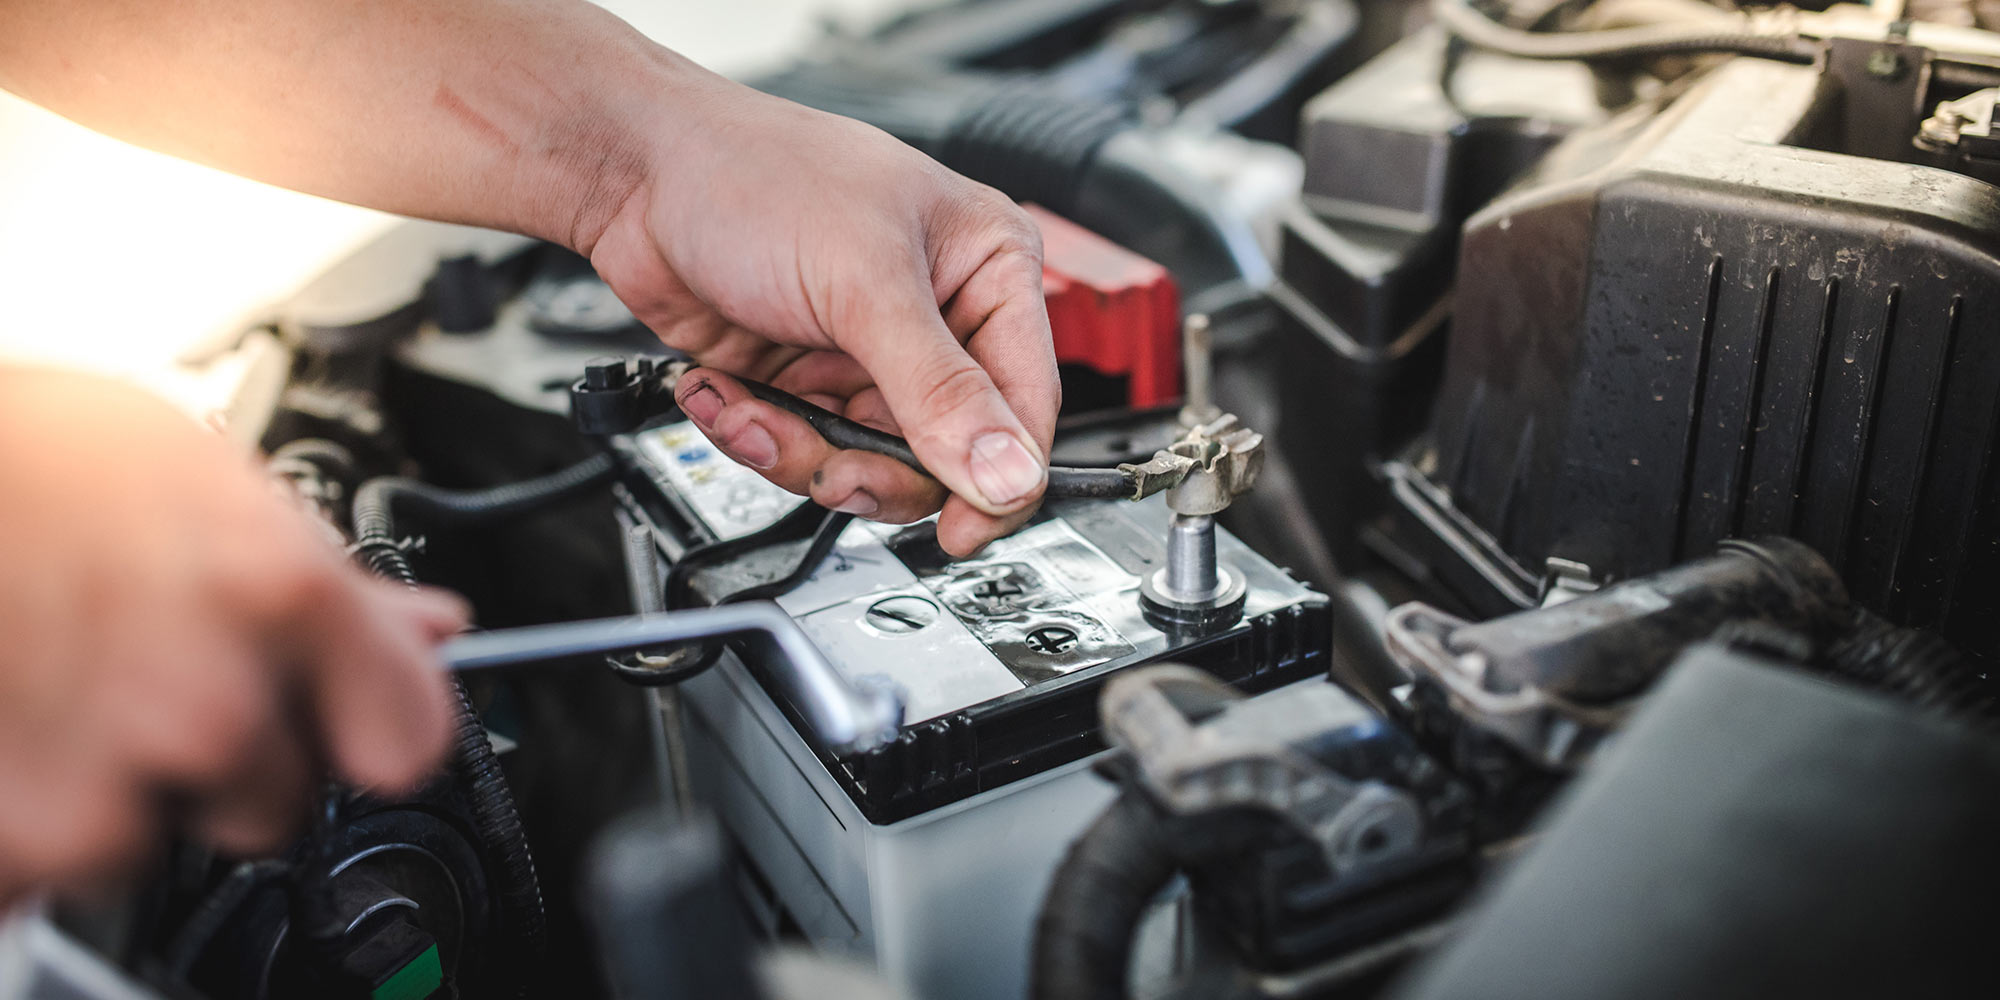 Tips, Guides & Resources For Keeping Your Car Up & Running In